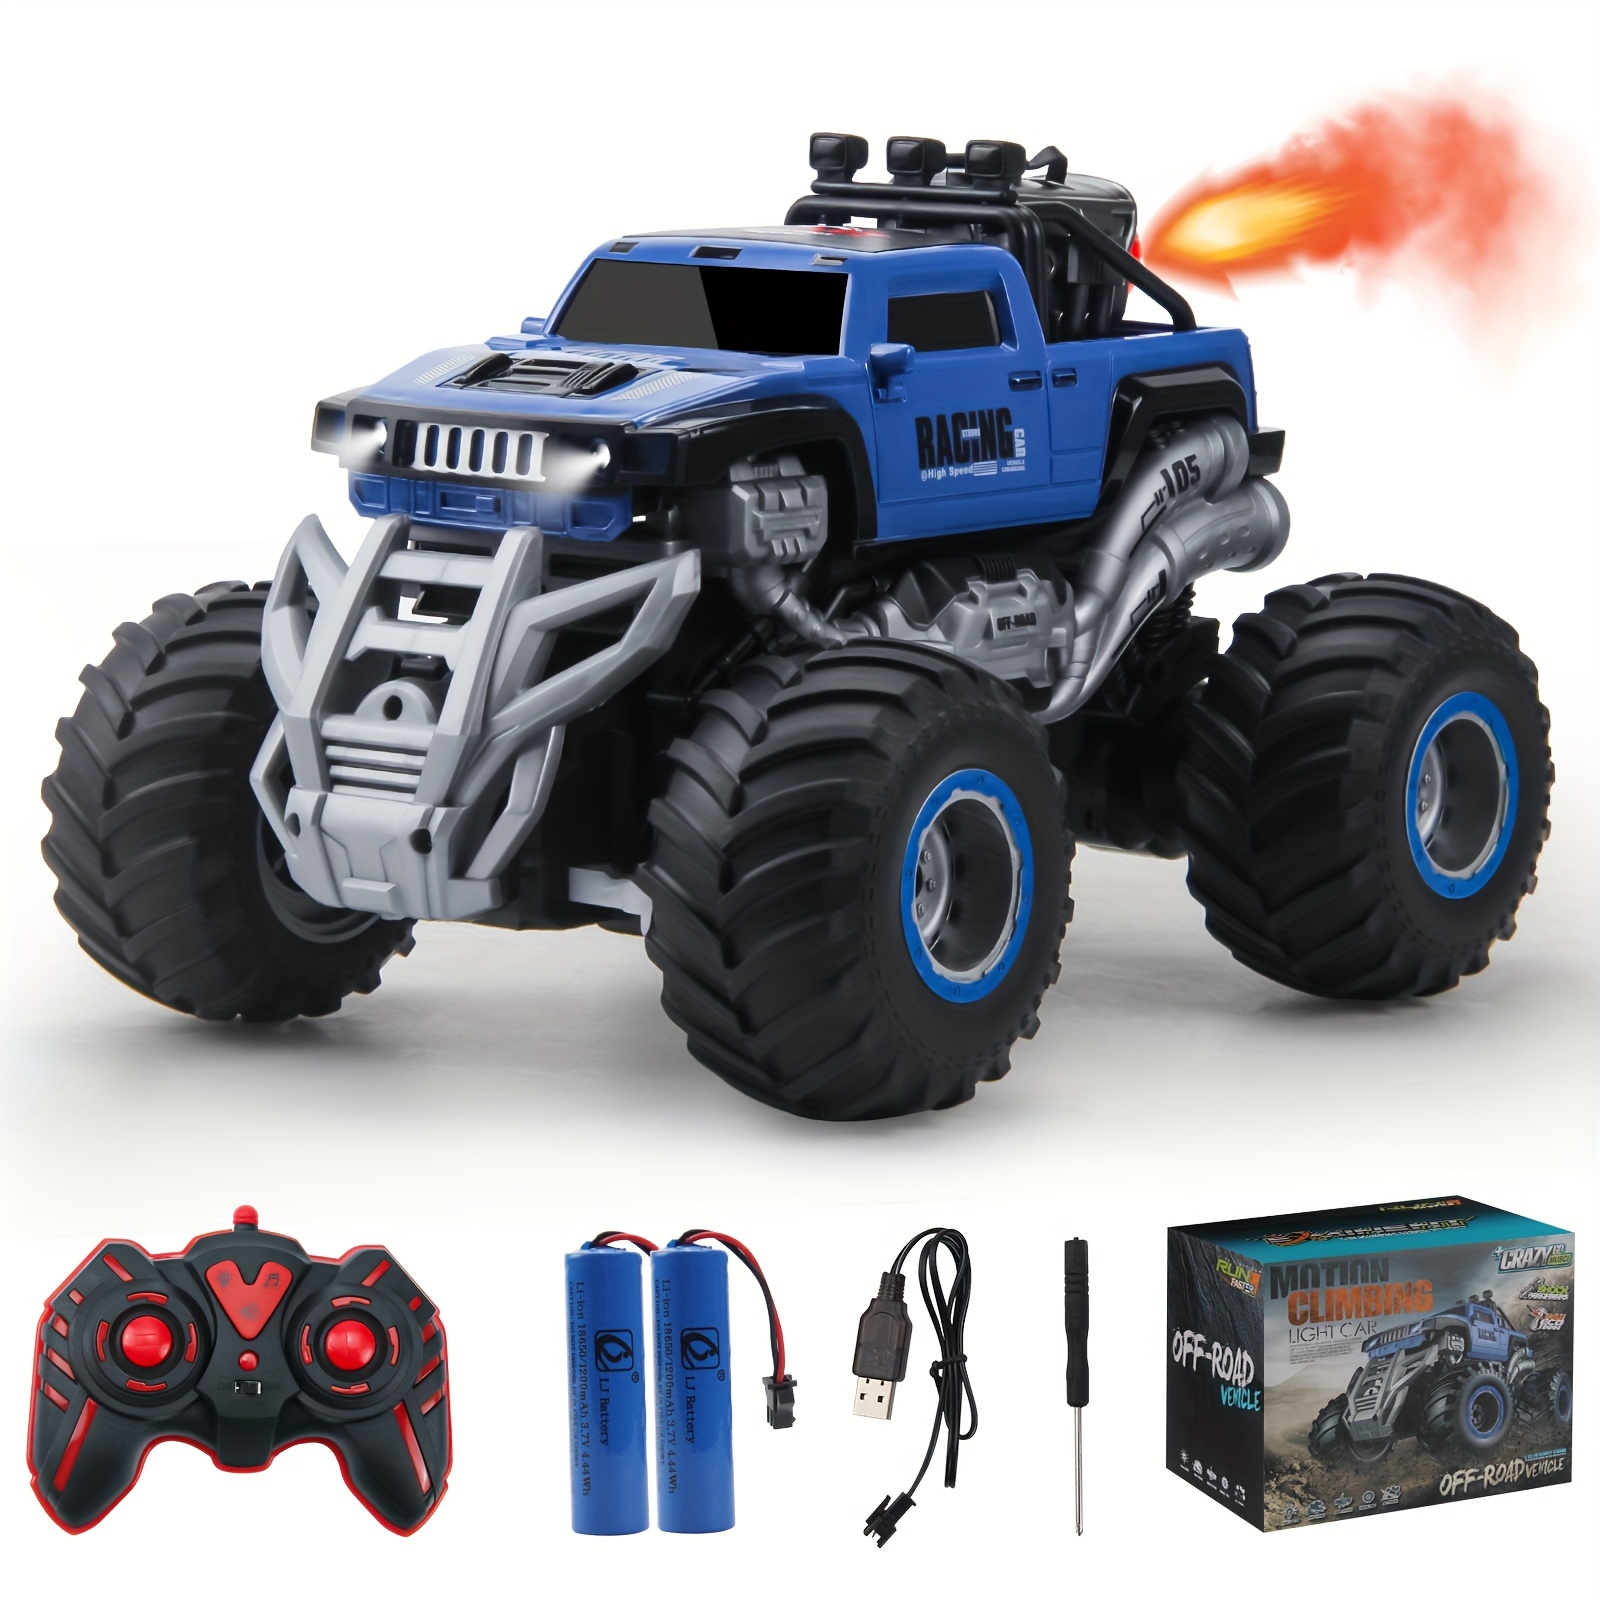 

Remote Control Monster Truck 2.4ghz Remote Control Car, Truck 2 Battery 80 Mins+, 1:16 Scale Indoor Outdoor All Terrain Spray Remote Monster Trucks For Boys 4-7 8-12 And Girls